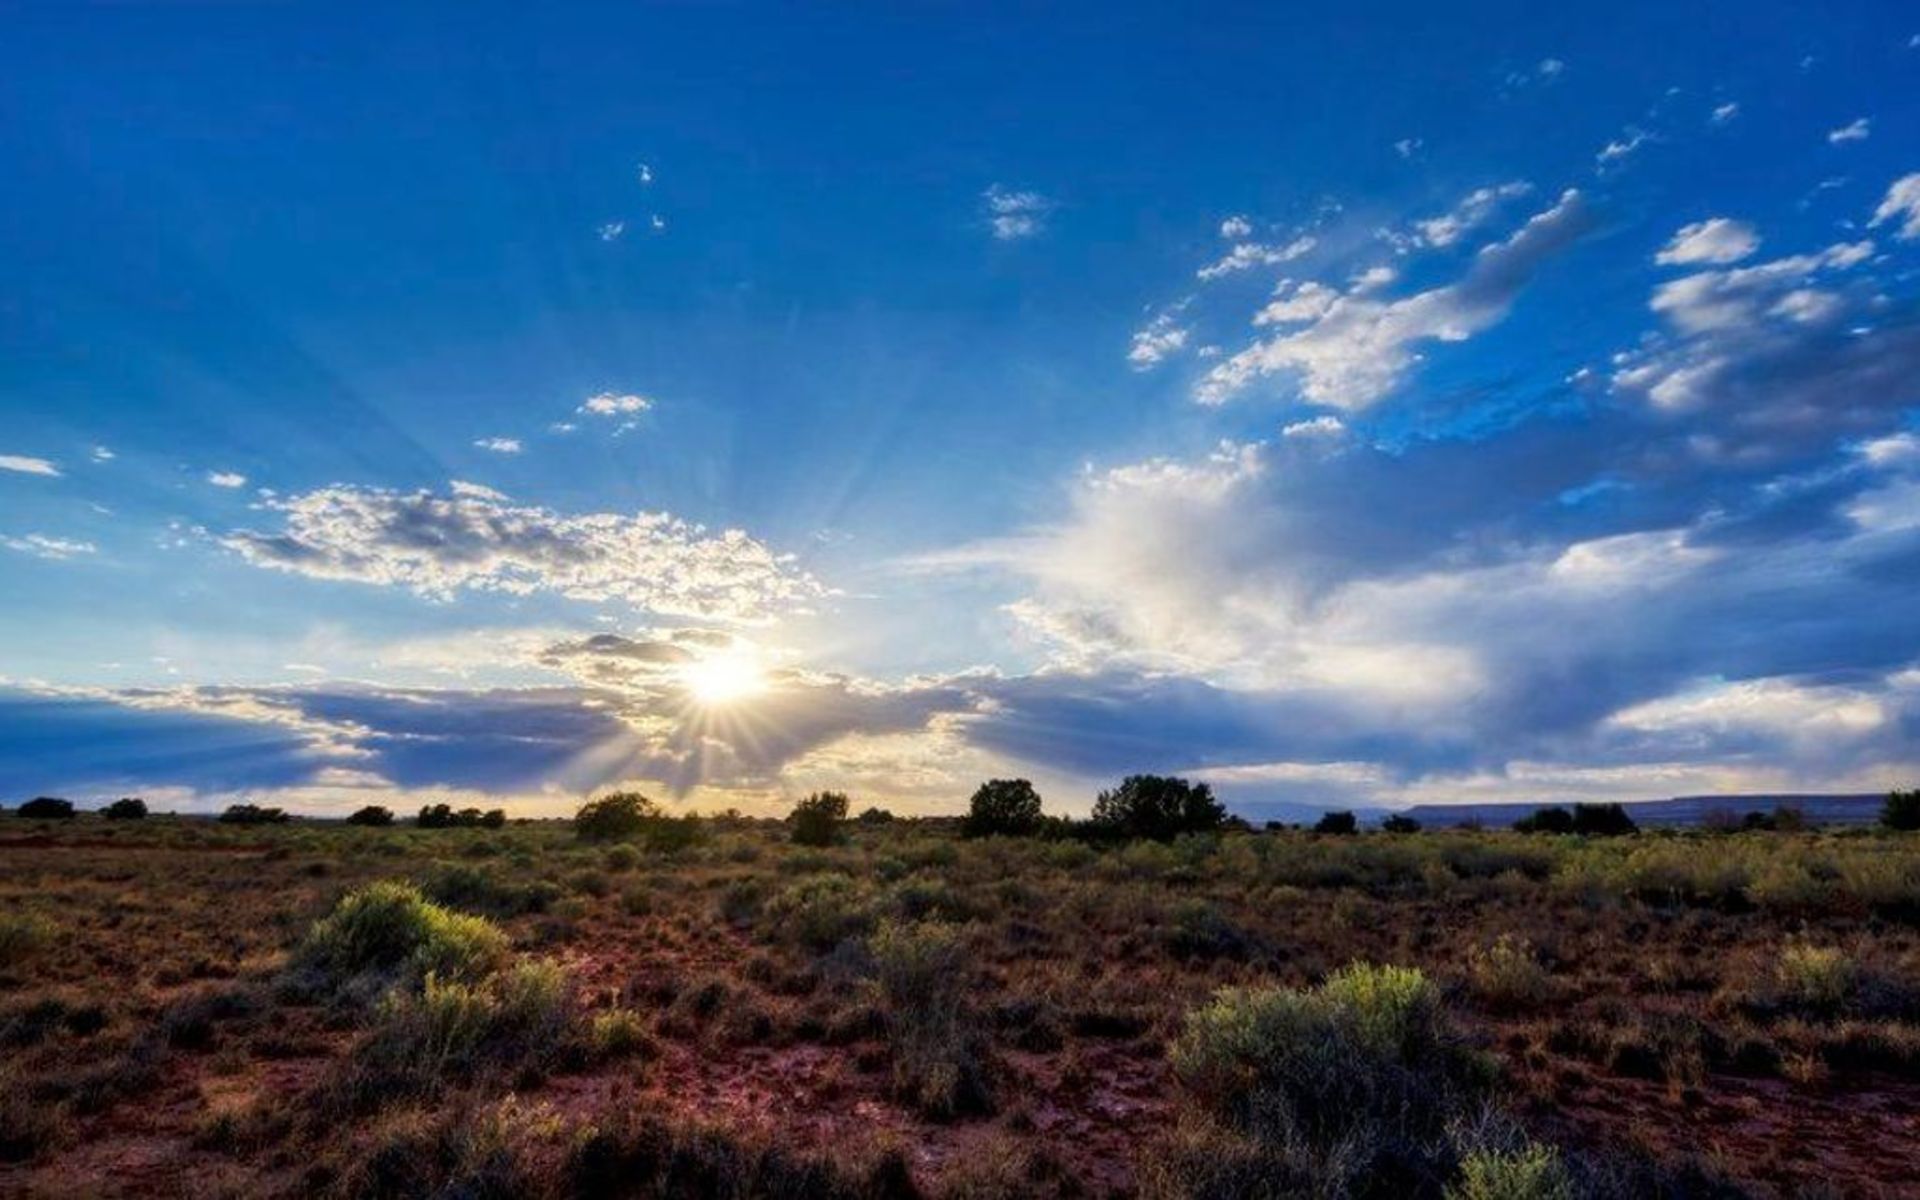 Discover One of New Mexico's Best Kept Secrets! - Image 11 of 11